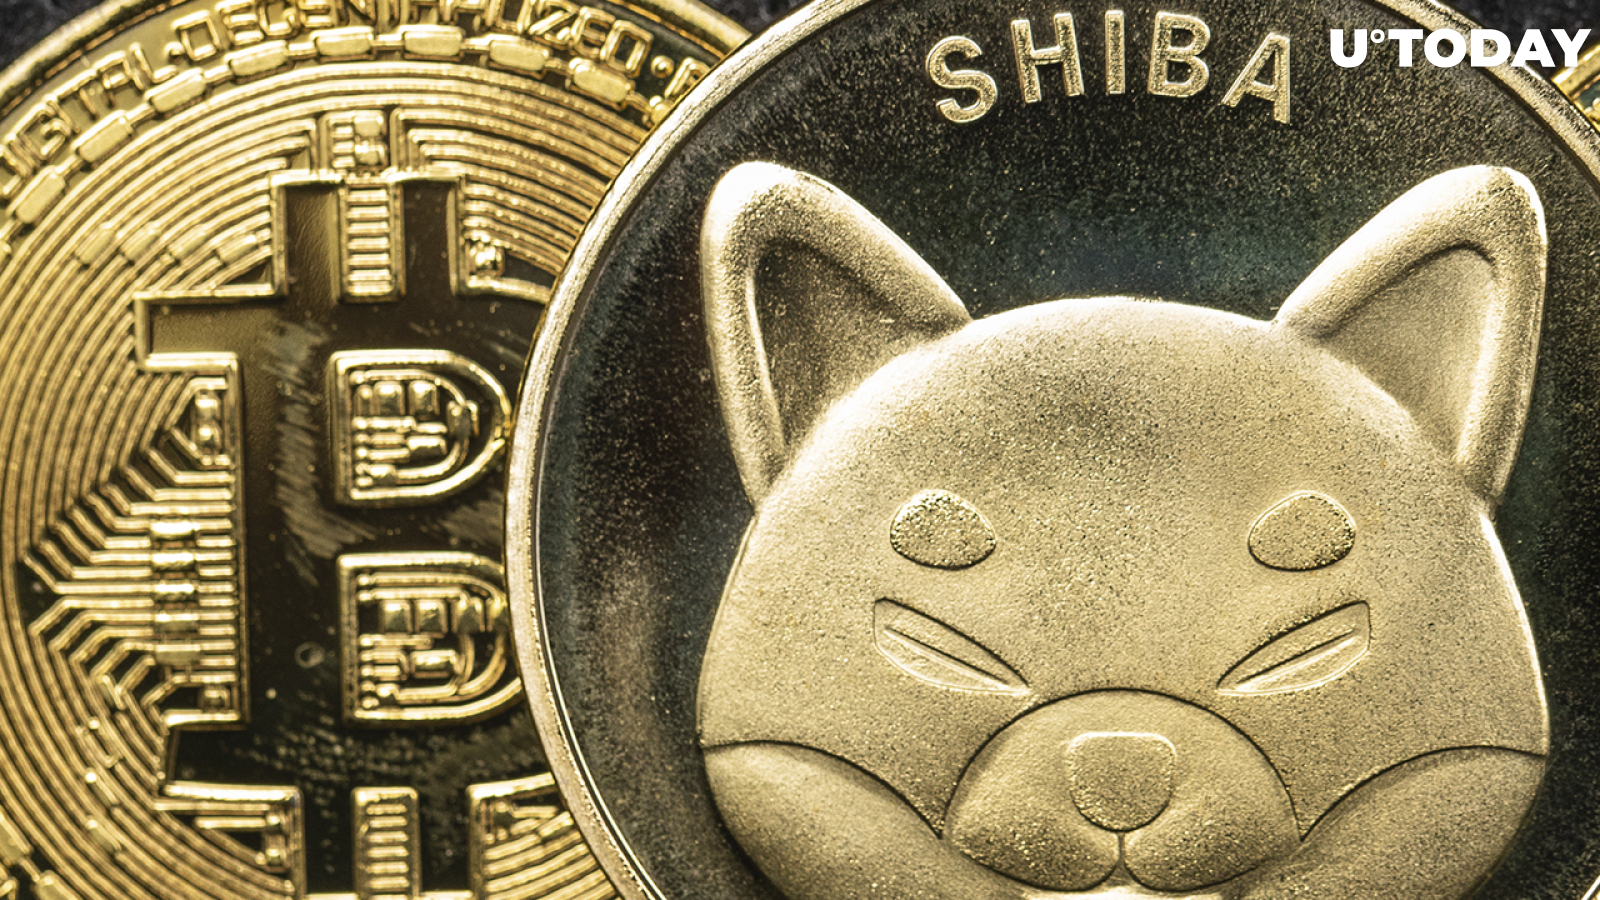 Shiba Inu, Bitcoin Now Accepted as Payment by Minnesota-Based Jewelry Shop via BitPay